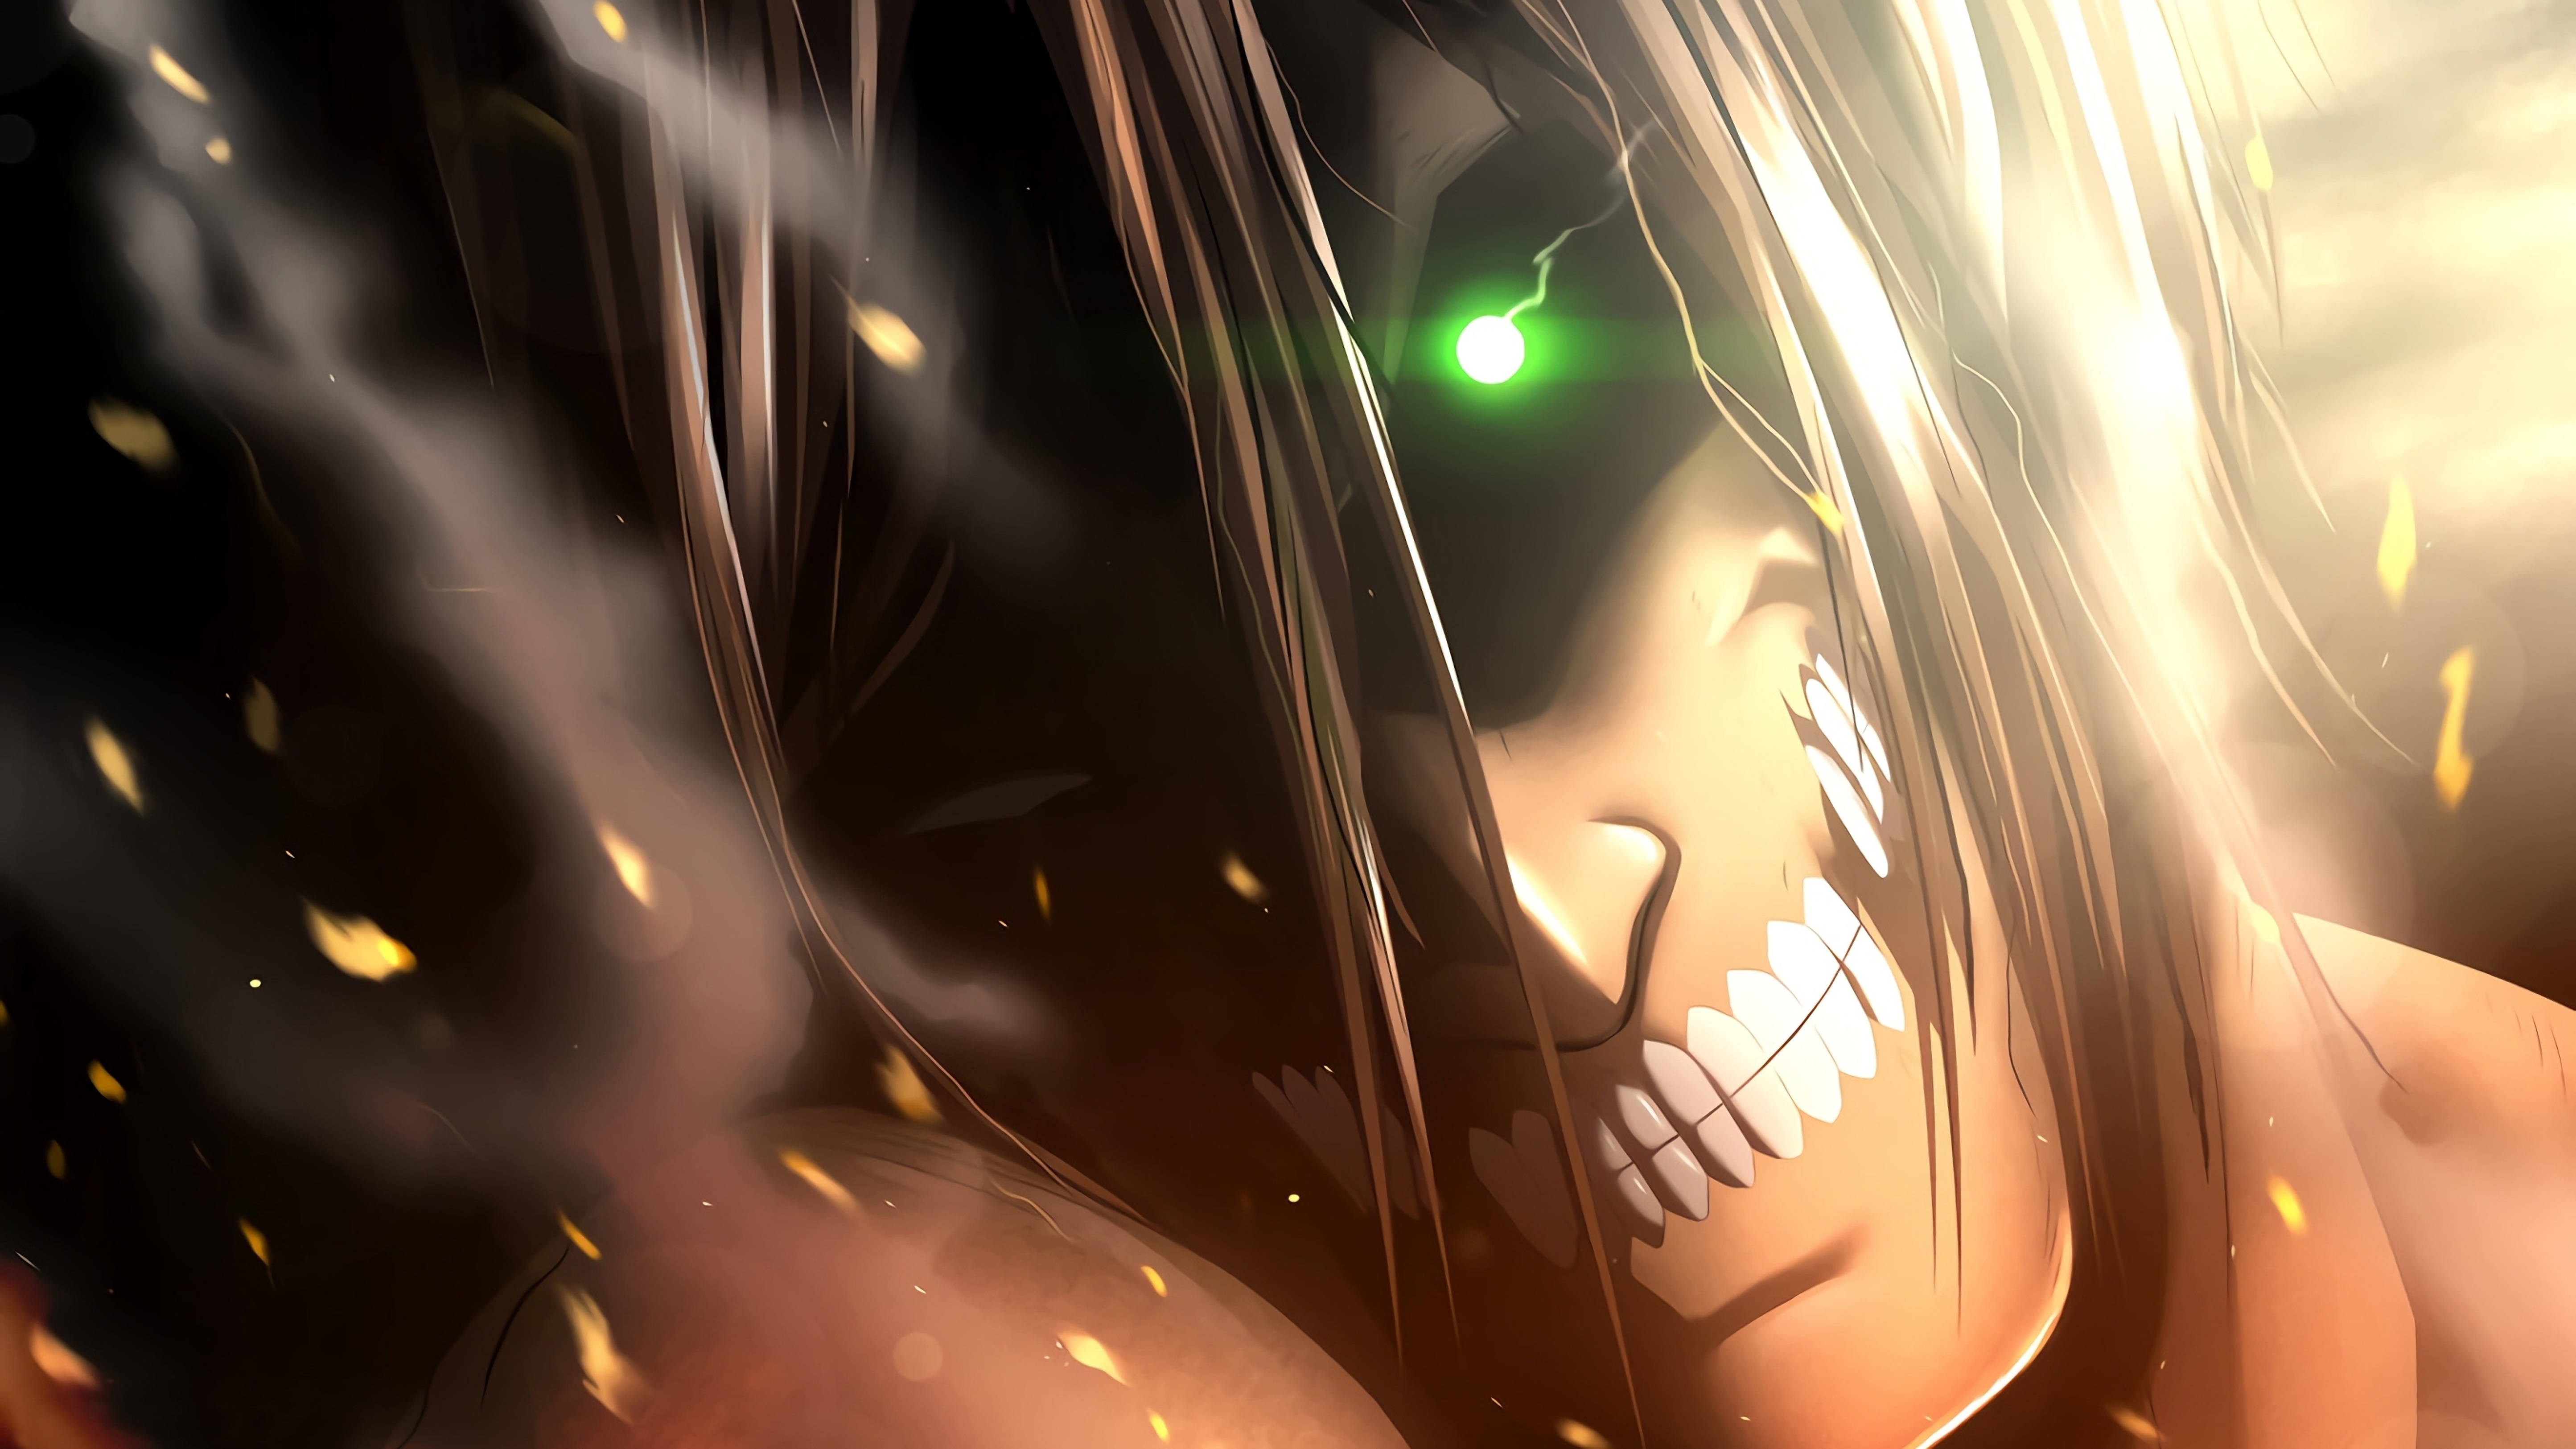 Attack On Titans 4k Physical Prowess Wallpaper